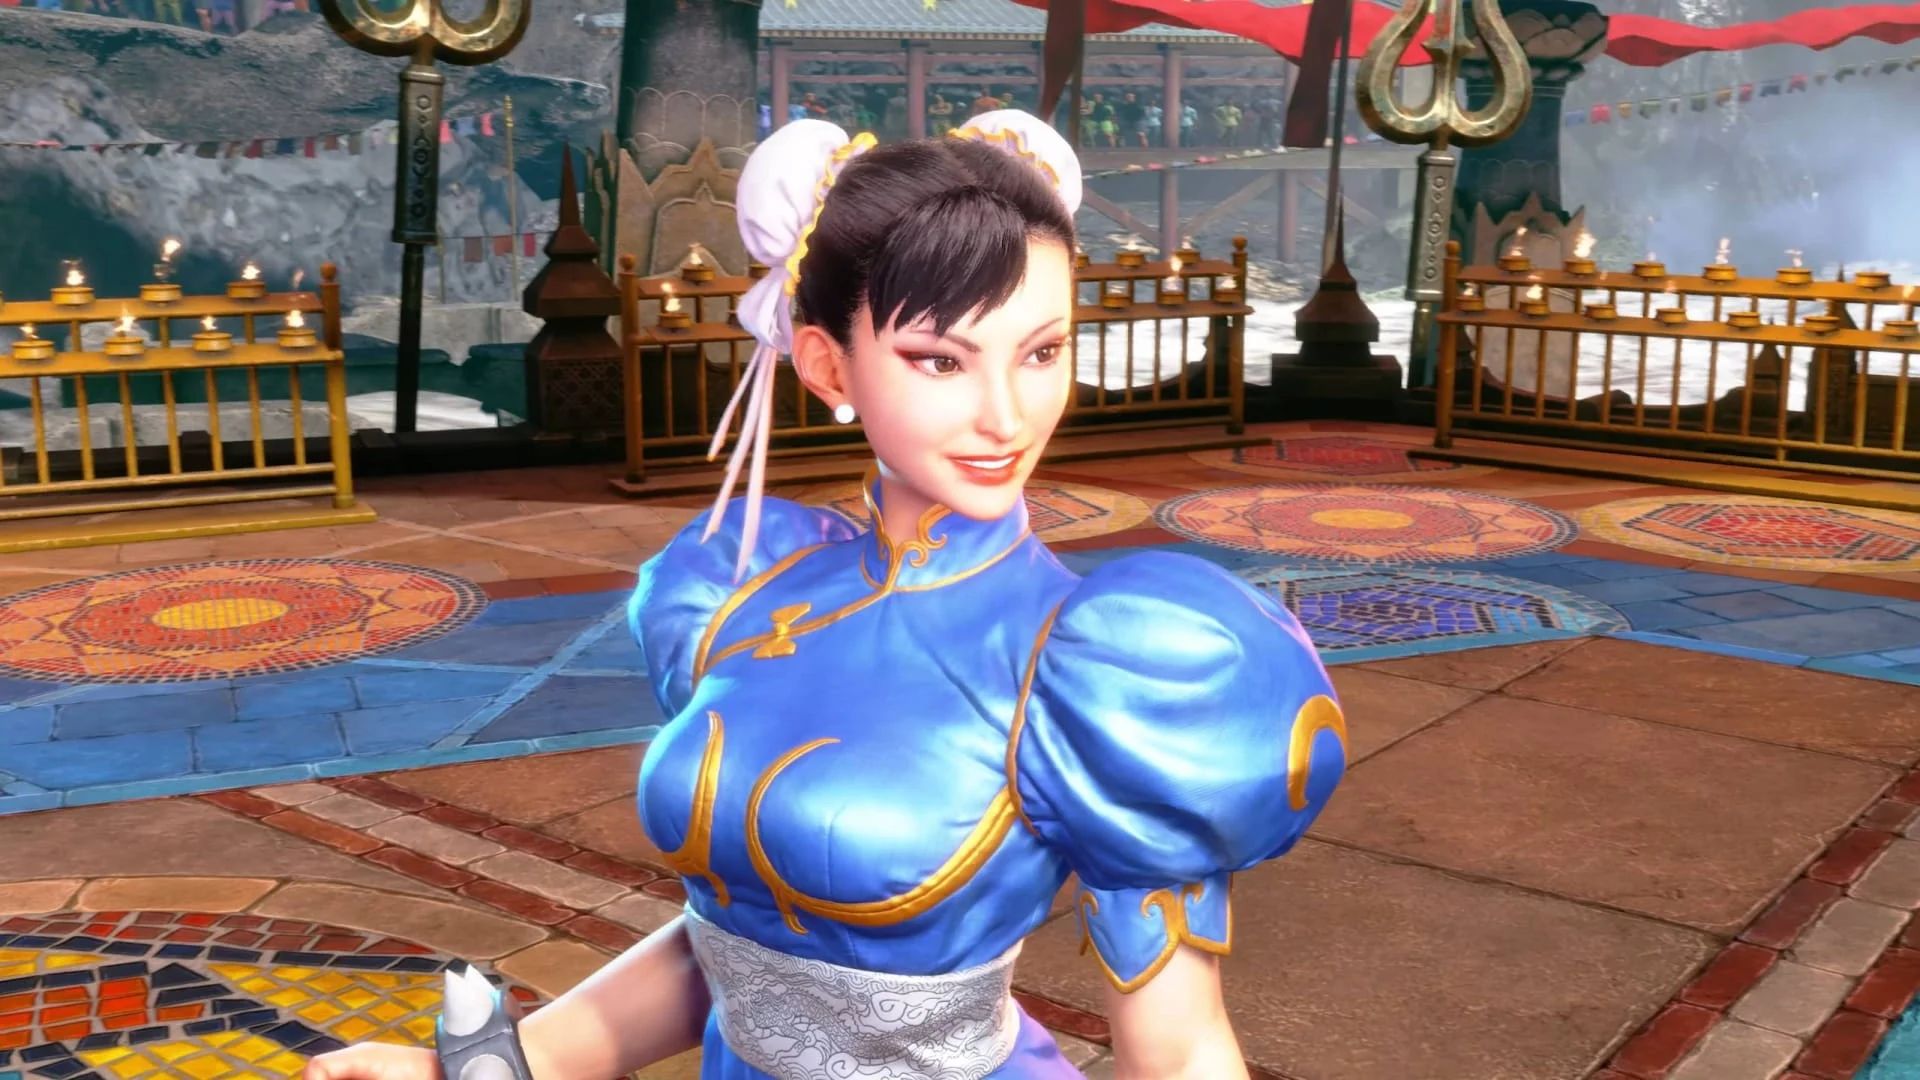 Street Fighter 6 Gets New Trailer Showing off Classic Costumes